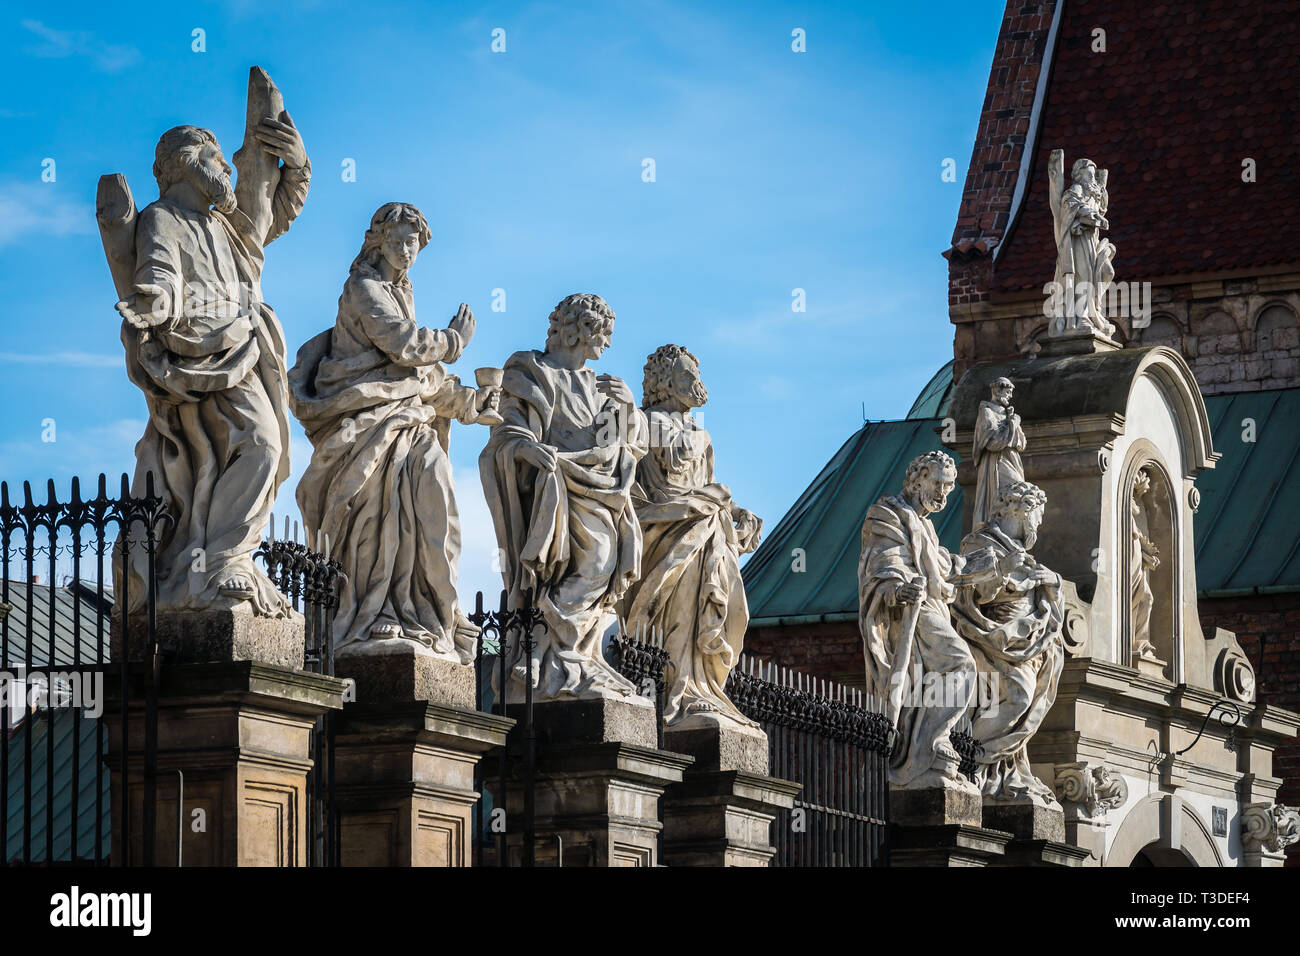 Krakow, Poland - March 22, 2019 - statues in front of The Church of Saints Peter and Paul Stock Photo